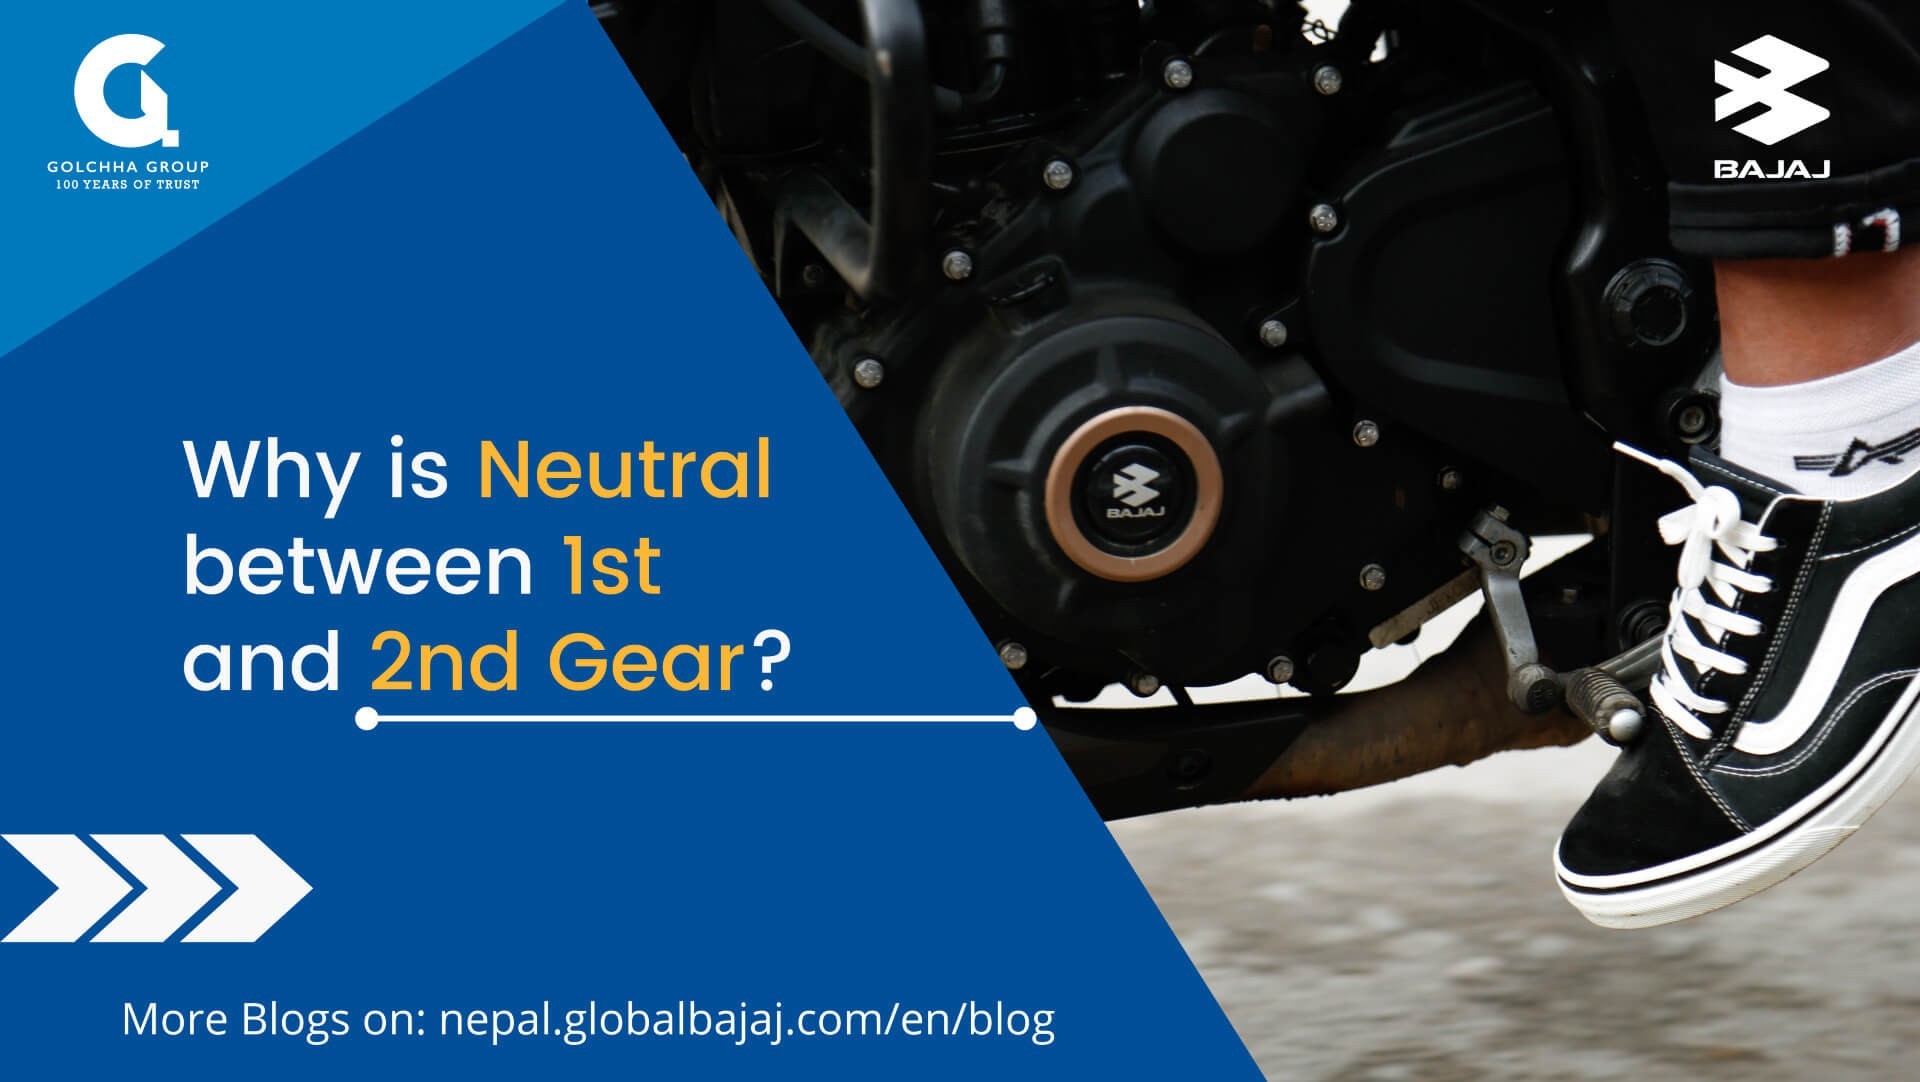 In a motorbike, Why is Neutral between the 1st and 2nd Gear?